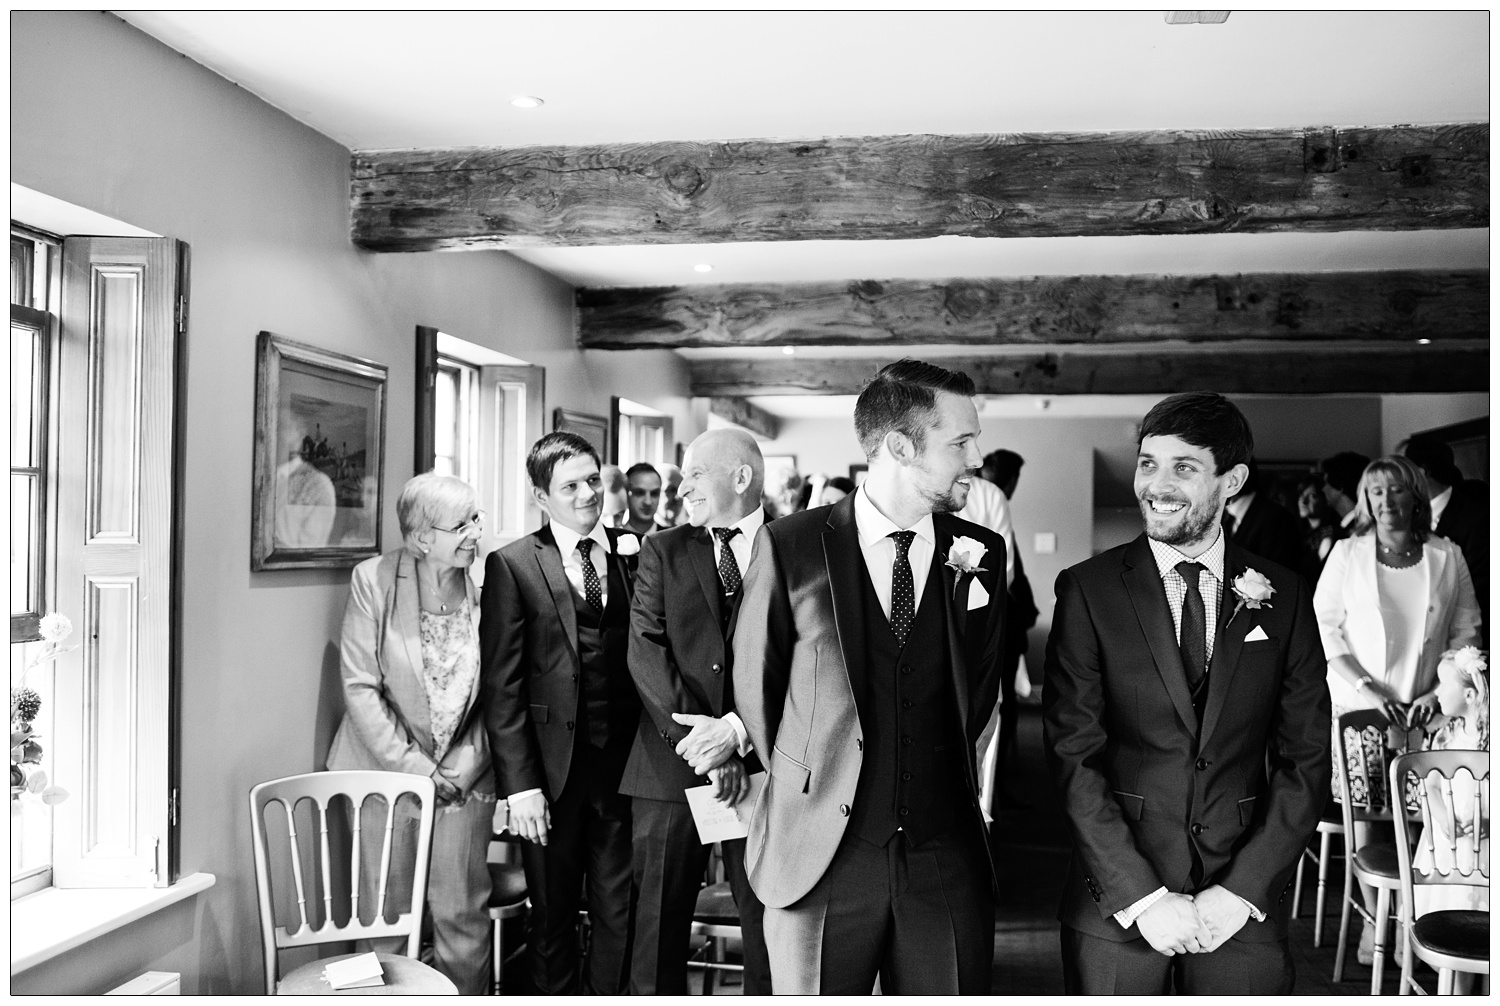 A man waits with his best man, the guests are standing up behind them in a dining room at the Inn at Whitewell.